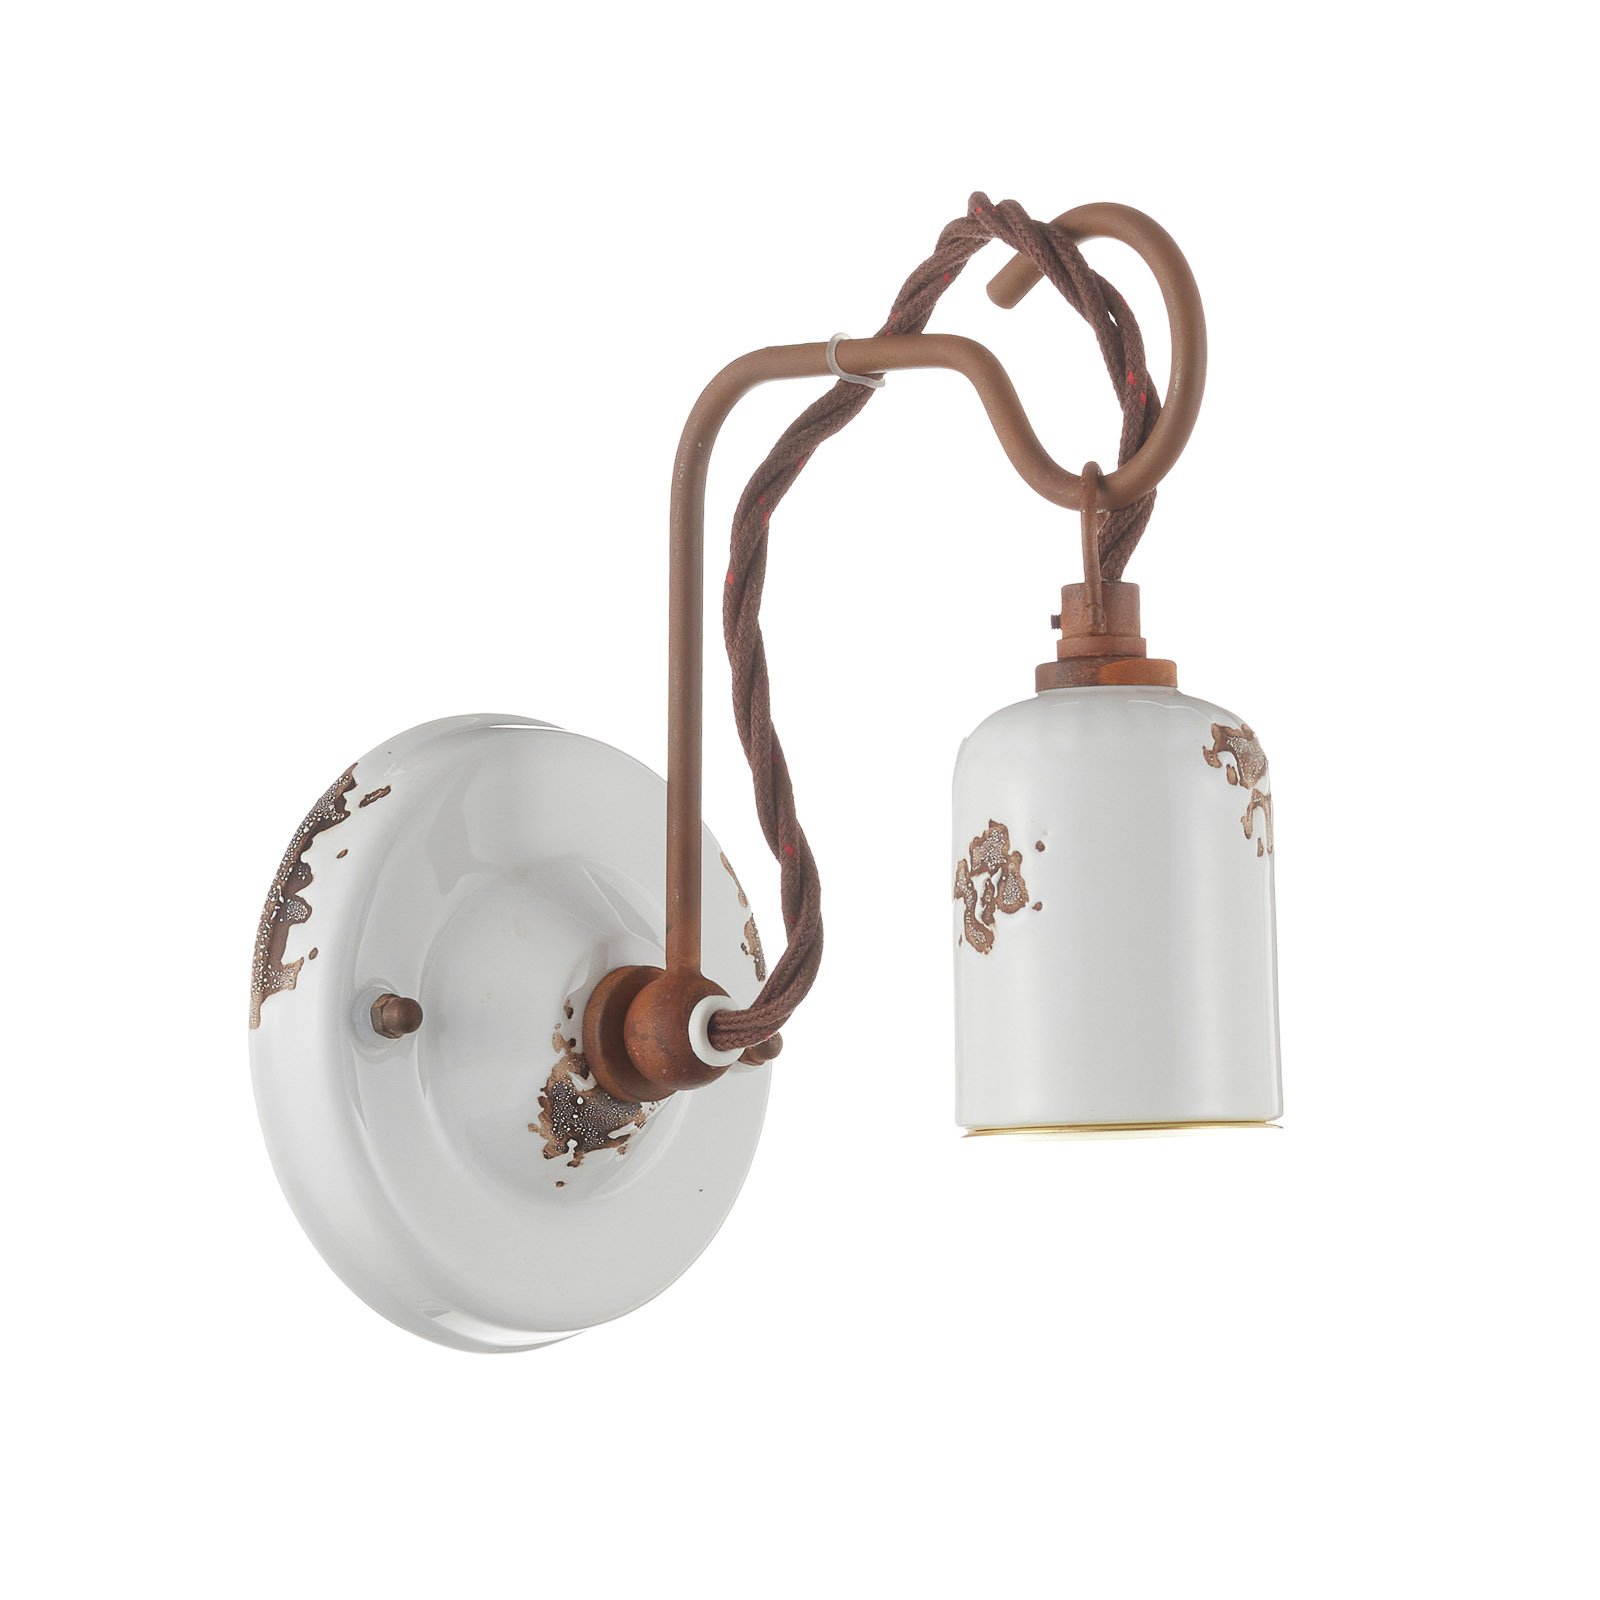 C665 wall light in vintage style white